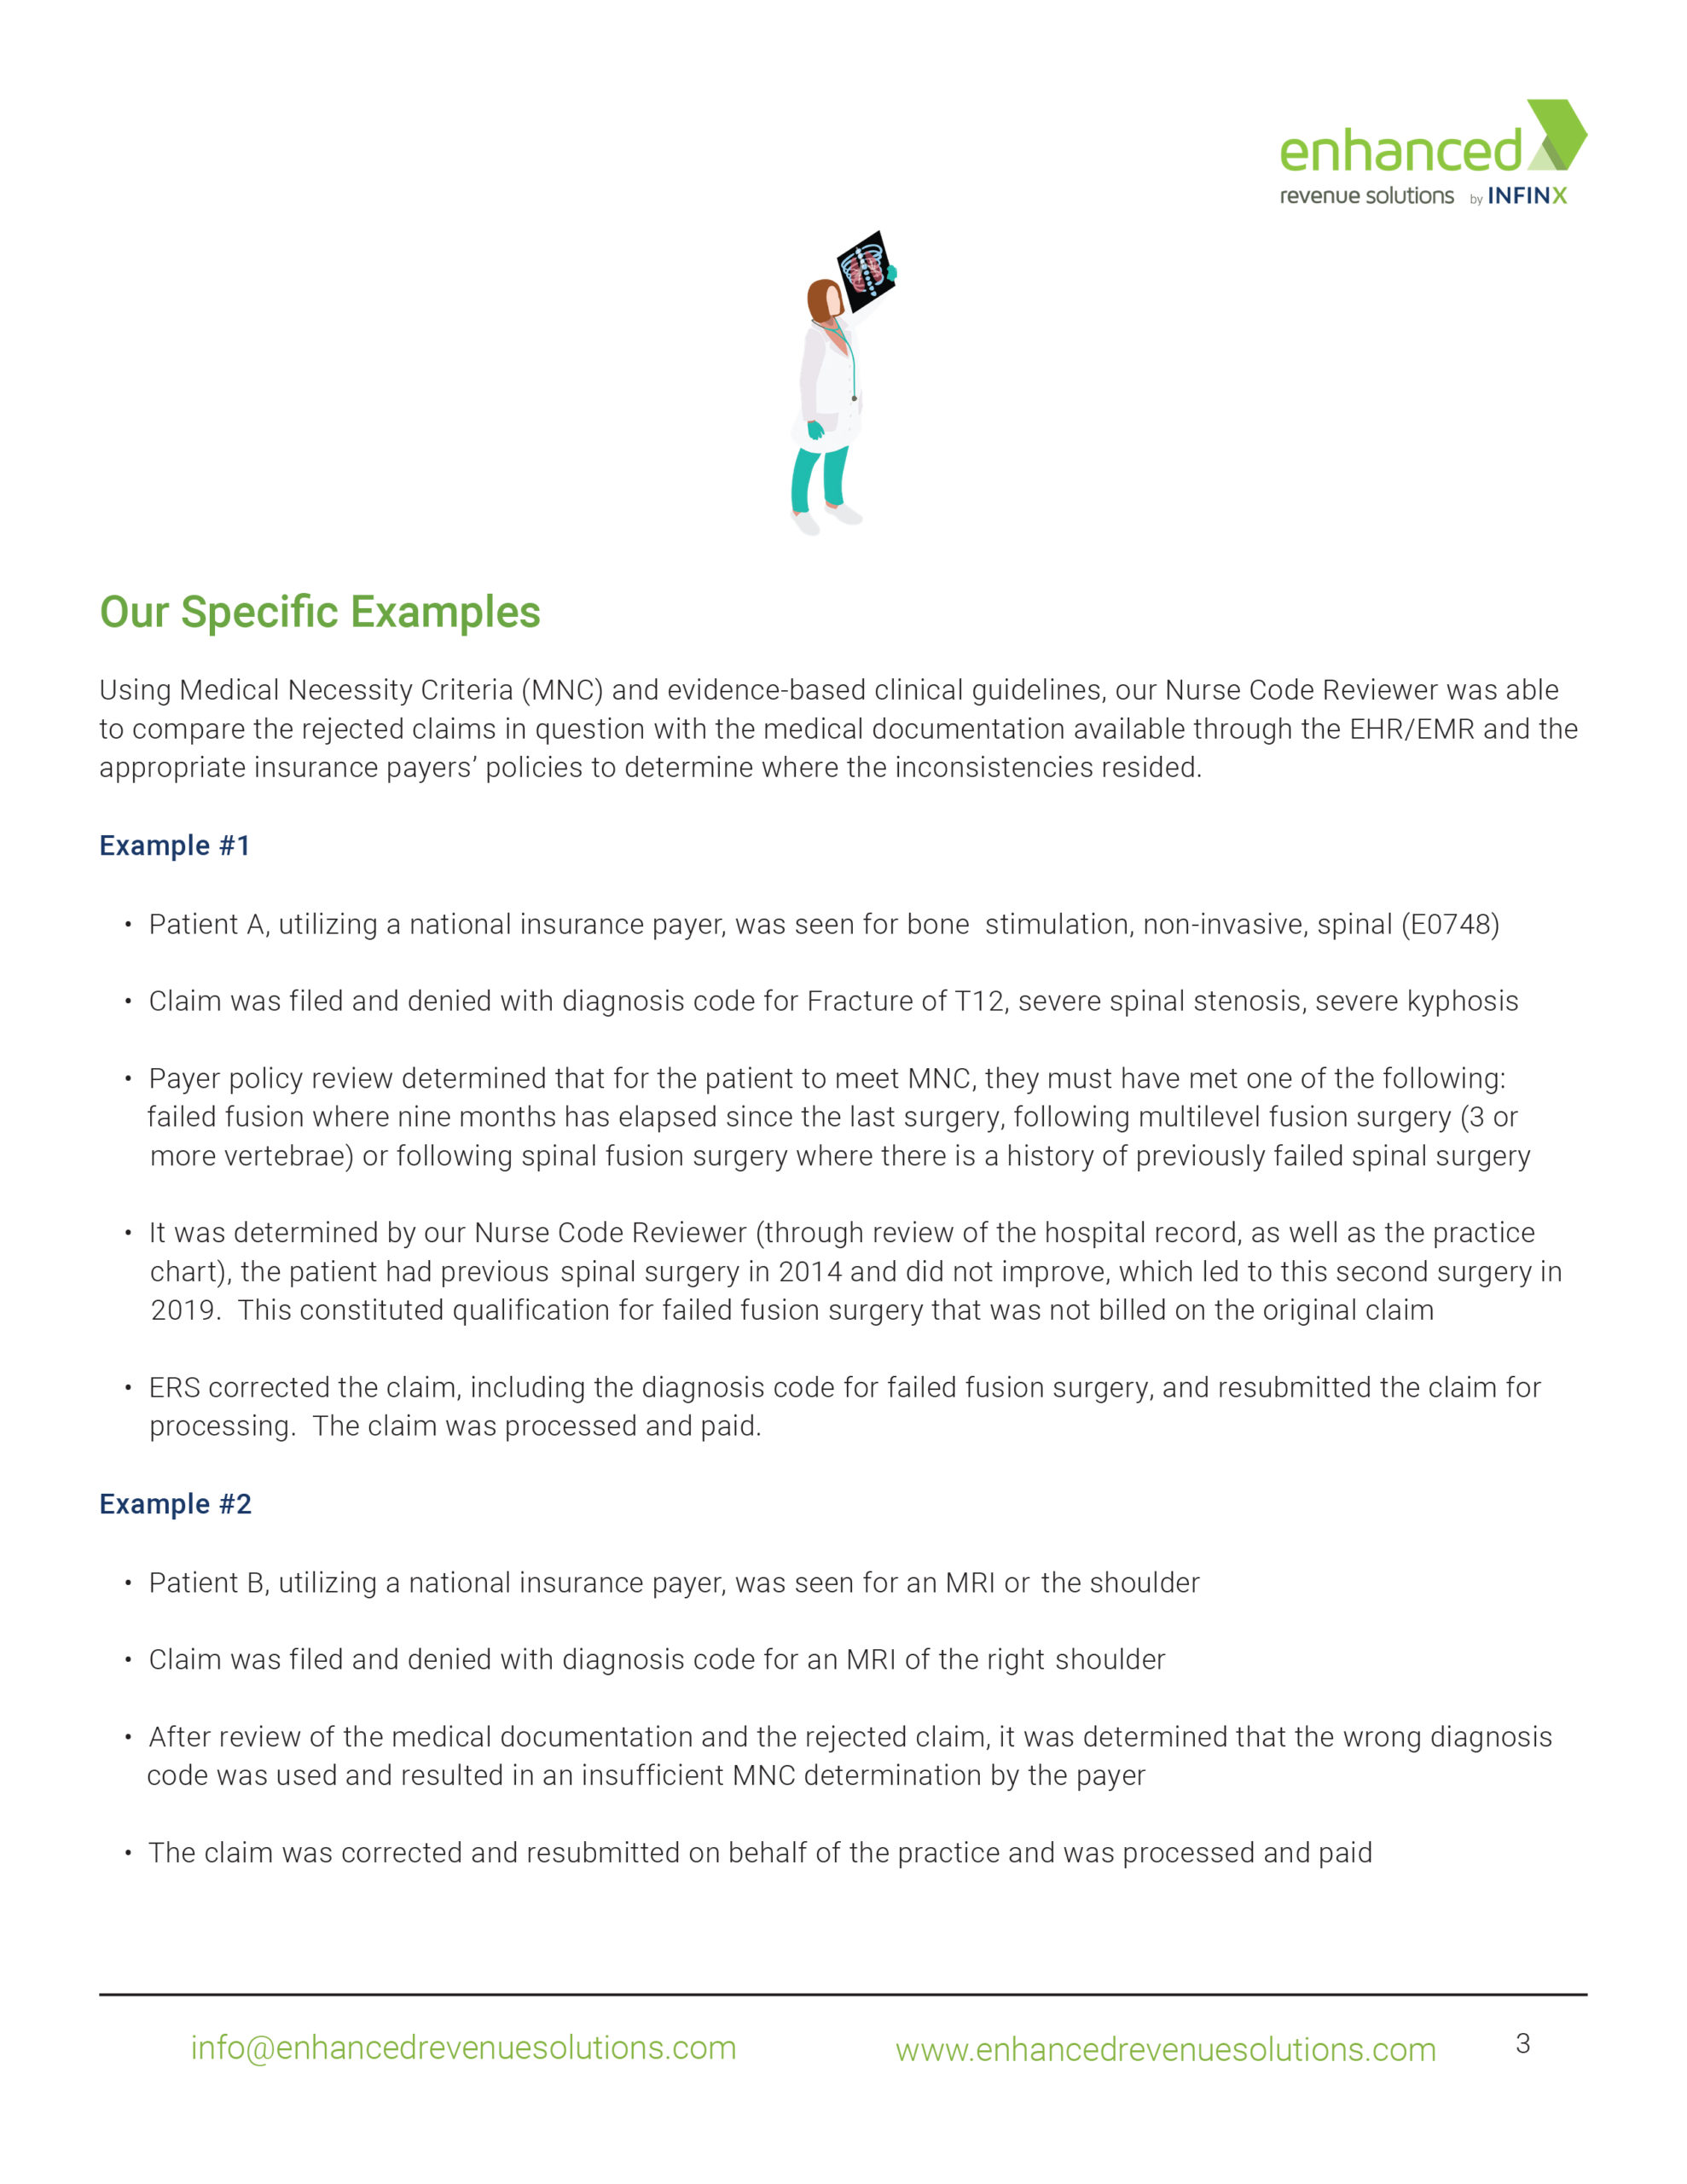 ERS by Infinx - Case Study - Succesfully Captured Revenue Previously Denied for Medical Necessity for a Multi-Facility Orthopedics and Sports Medicine Practice - 3